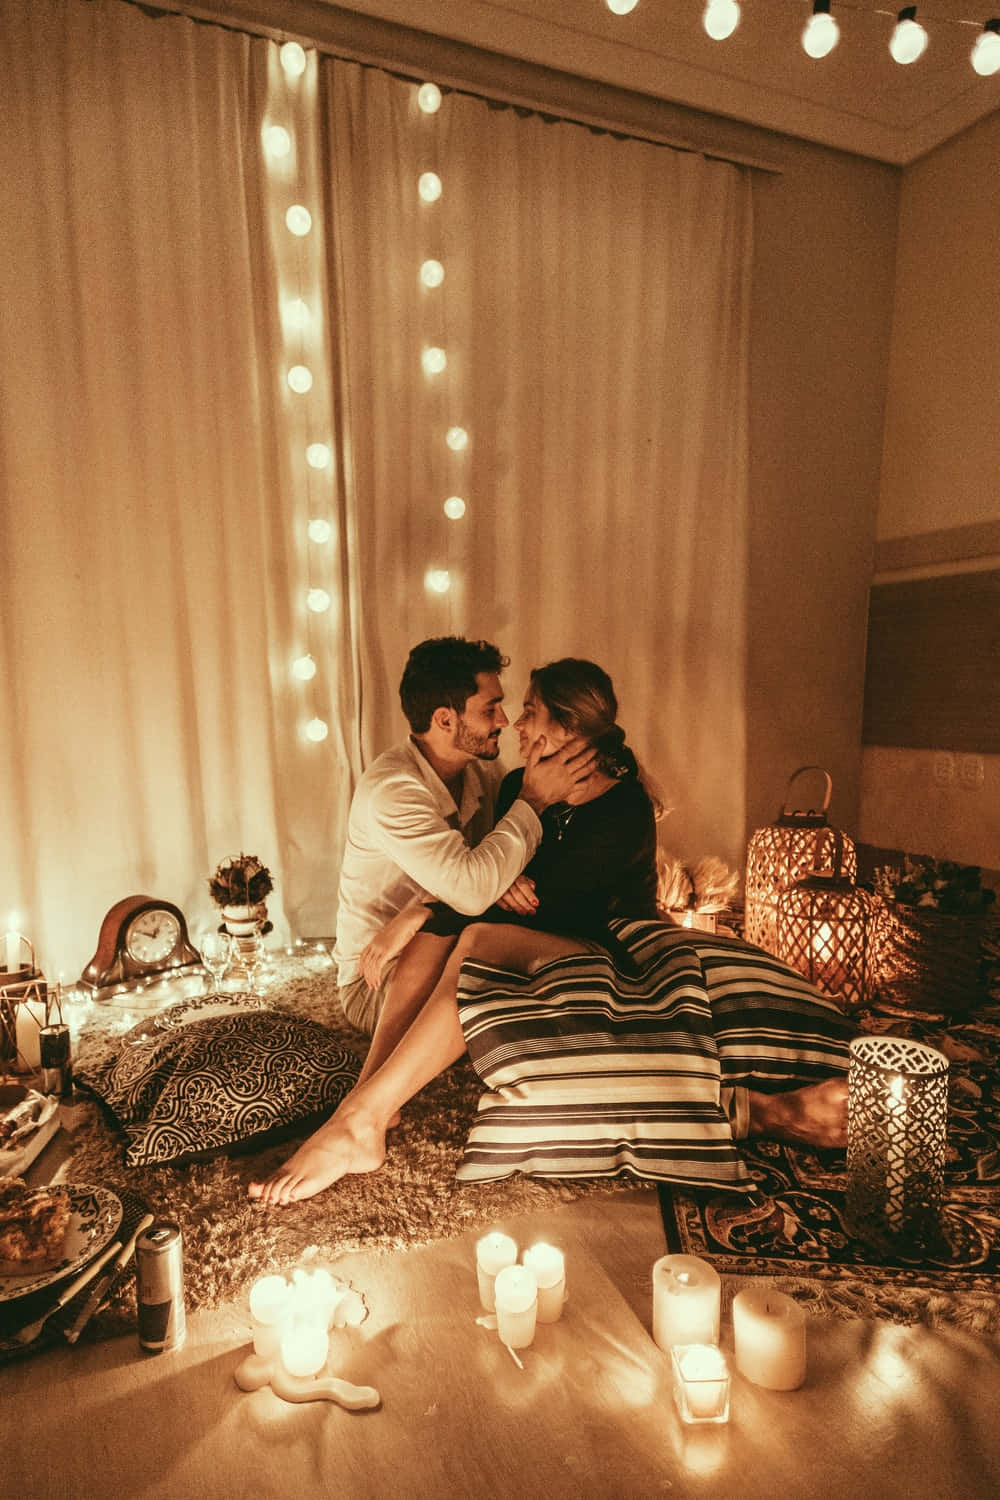 Relationship Cute Couple Room Pictures